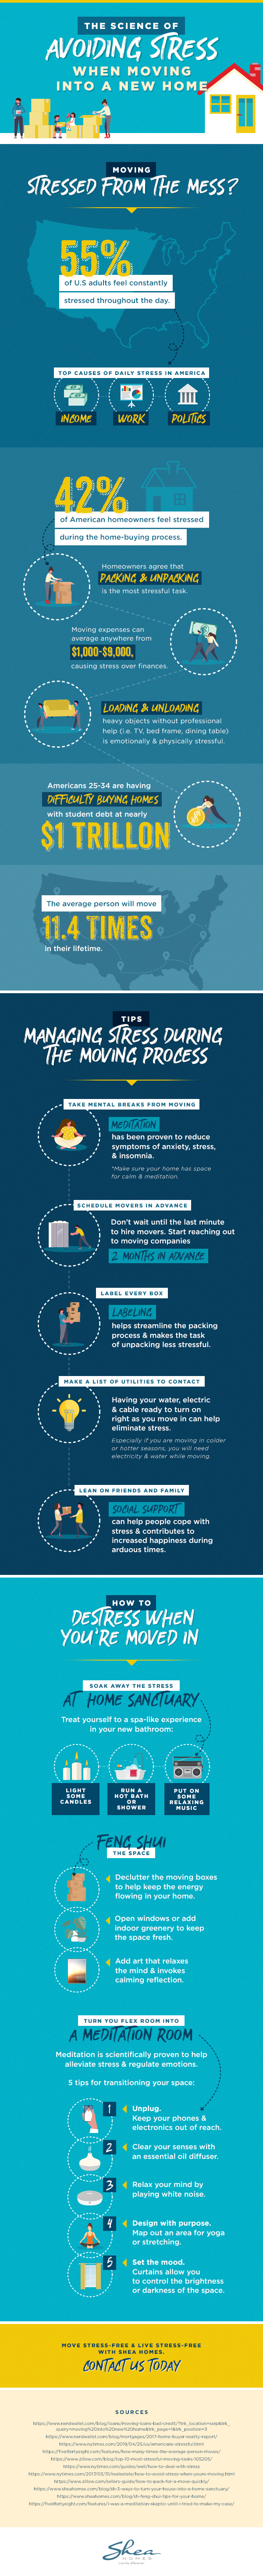 Infographic outlining how to avoid stress when moving into a new home